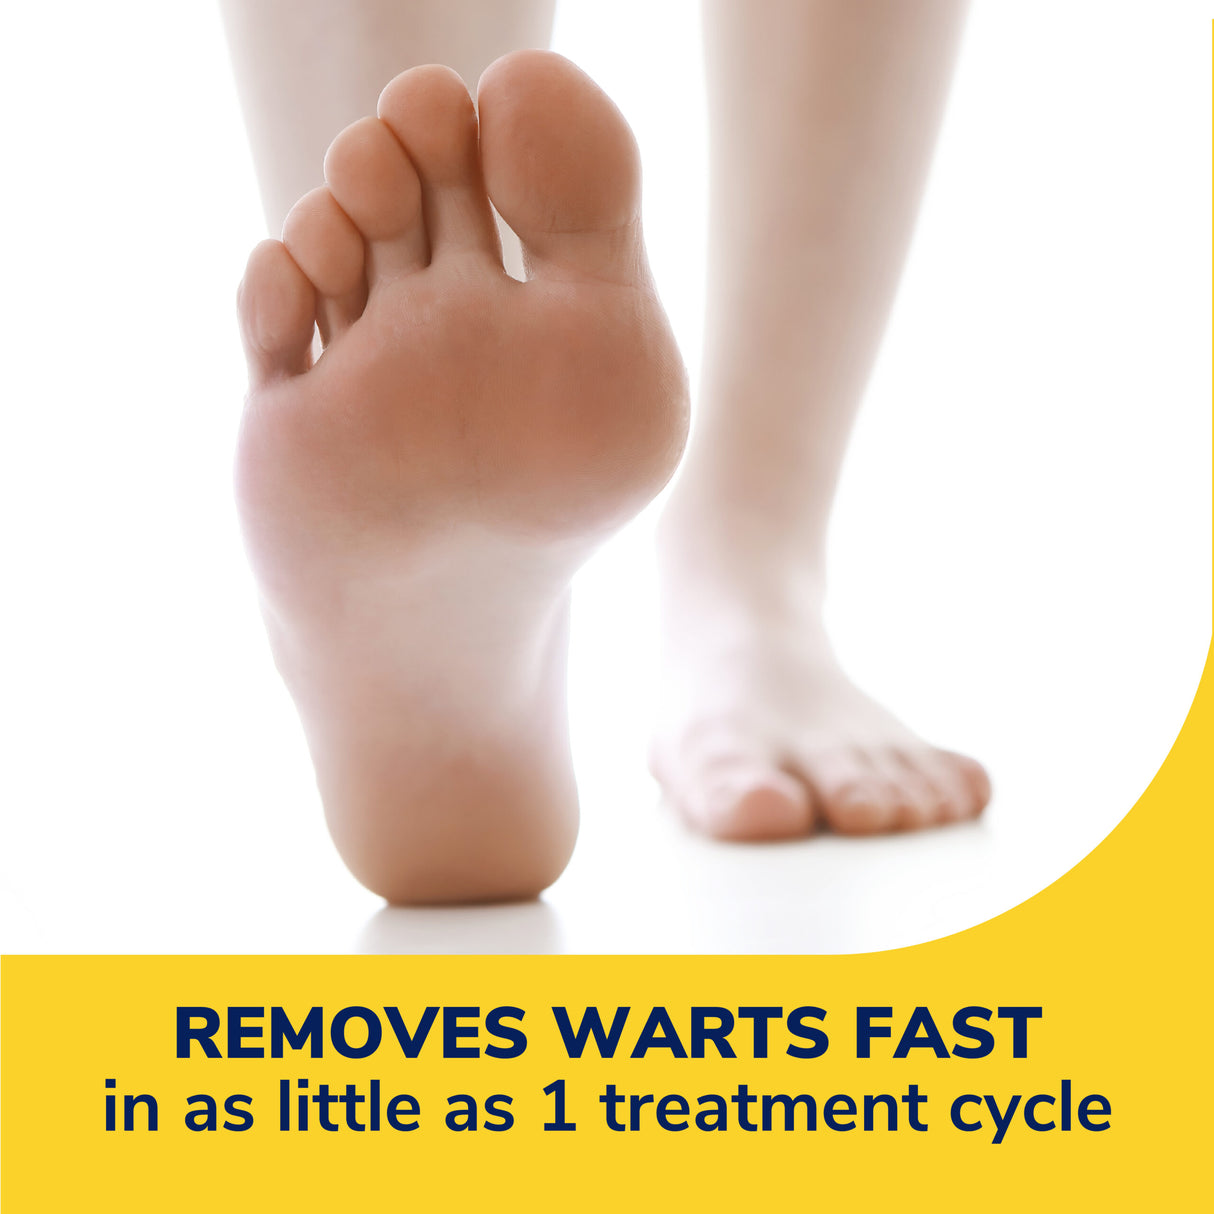 image of removes warts fast in as little as 1 treatment cycle